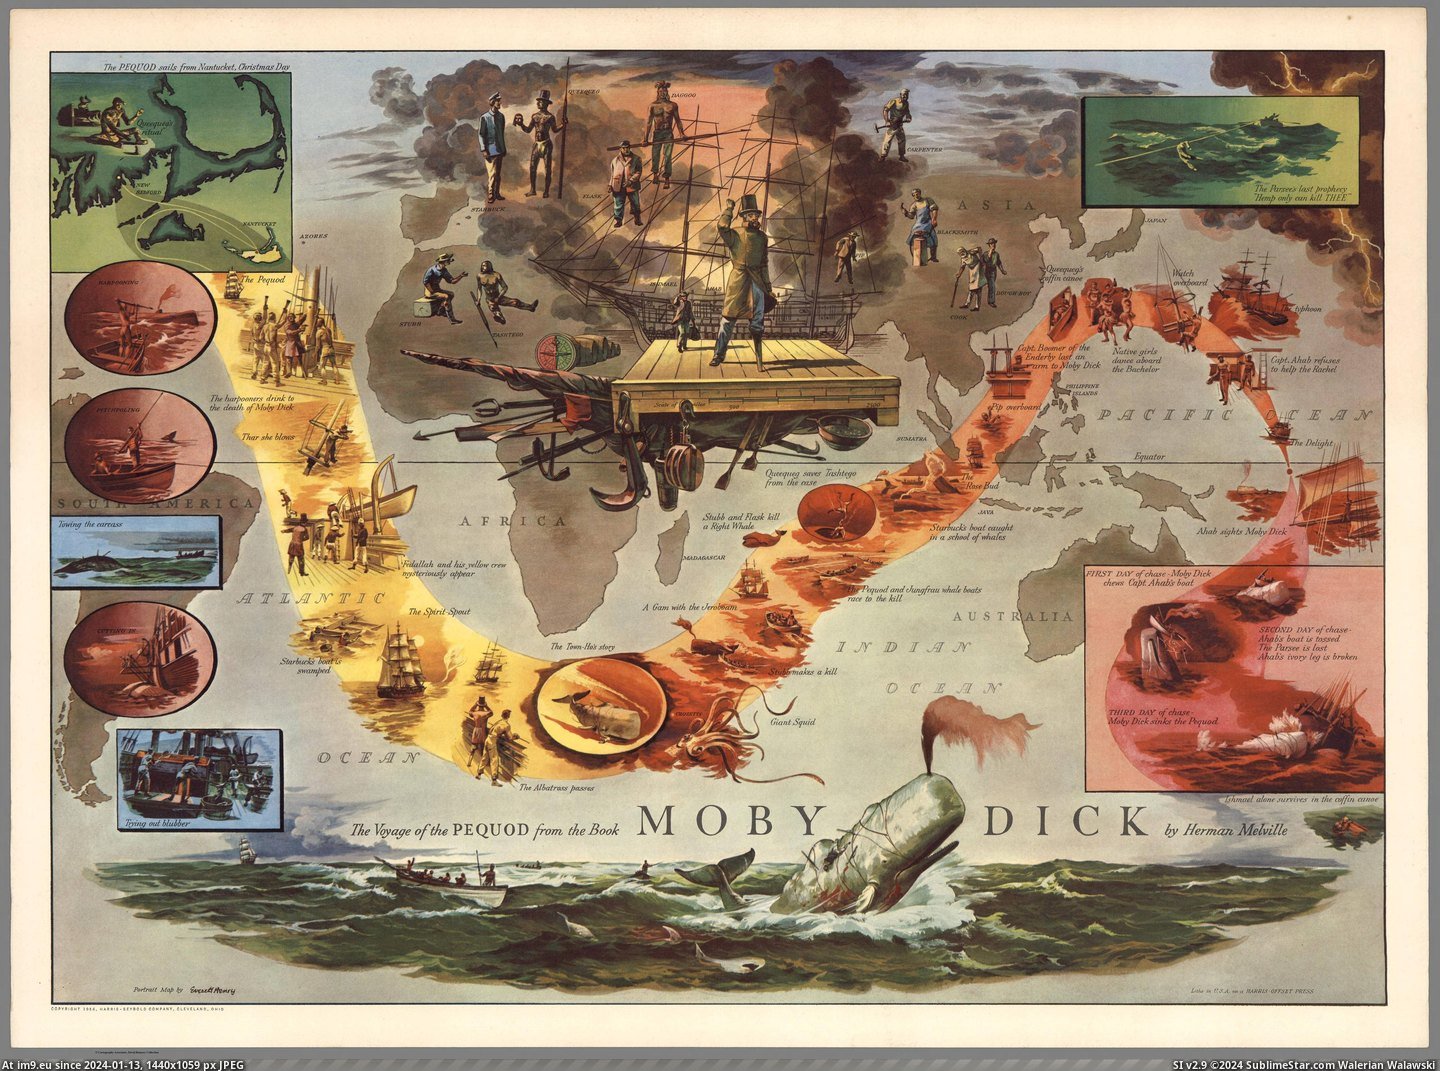 #Map #Dick #Book #Created #Everett #Melville #Pequod #Henry #Moby #Herman #Voyage [Mapporn] The Voyage of the Pequod from the Book Moby Dick by Herman Melville. Map created by Everett Henry in 1956 [5118x3776] Pic. (Image of album ))